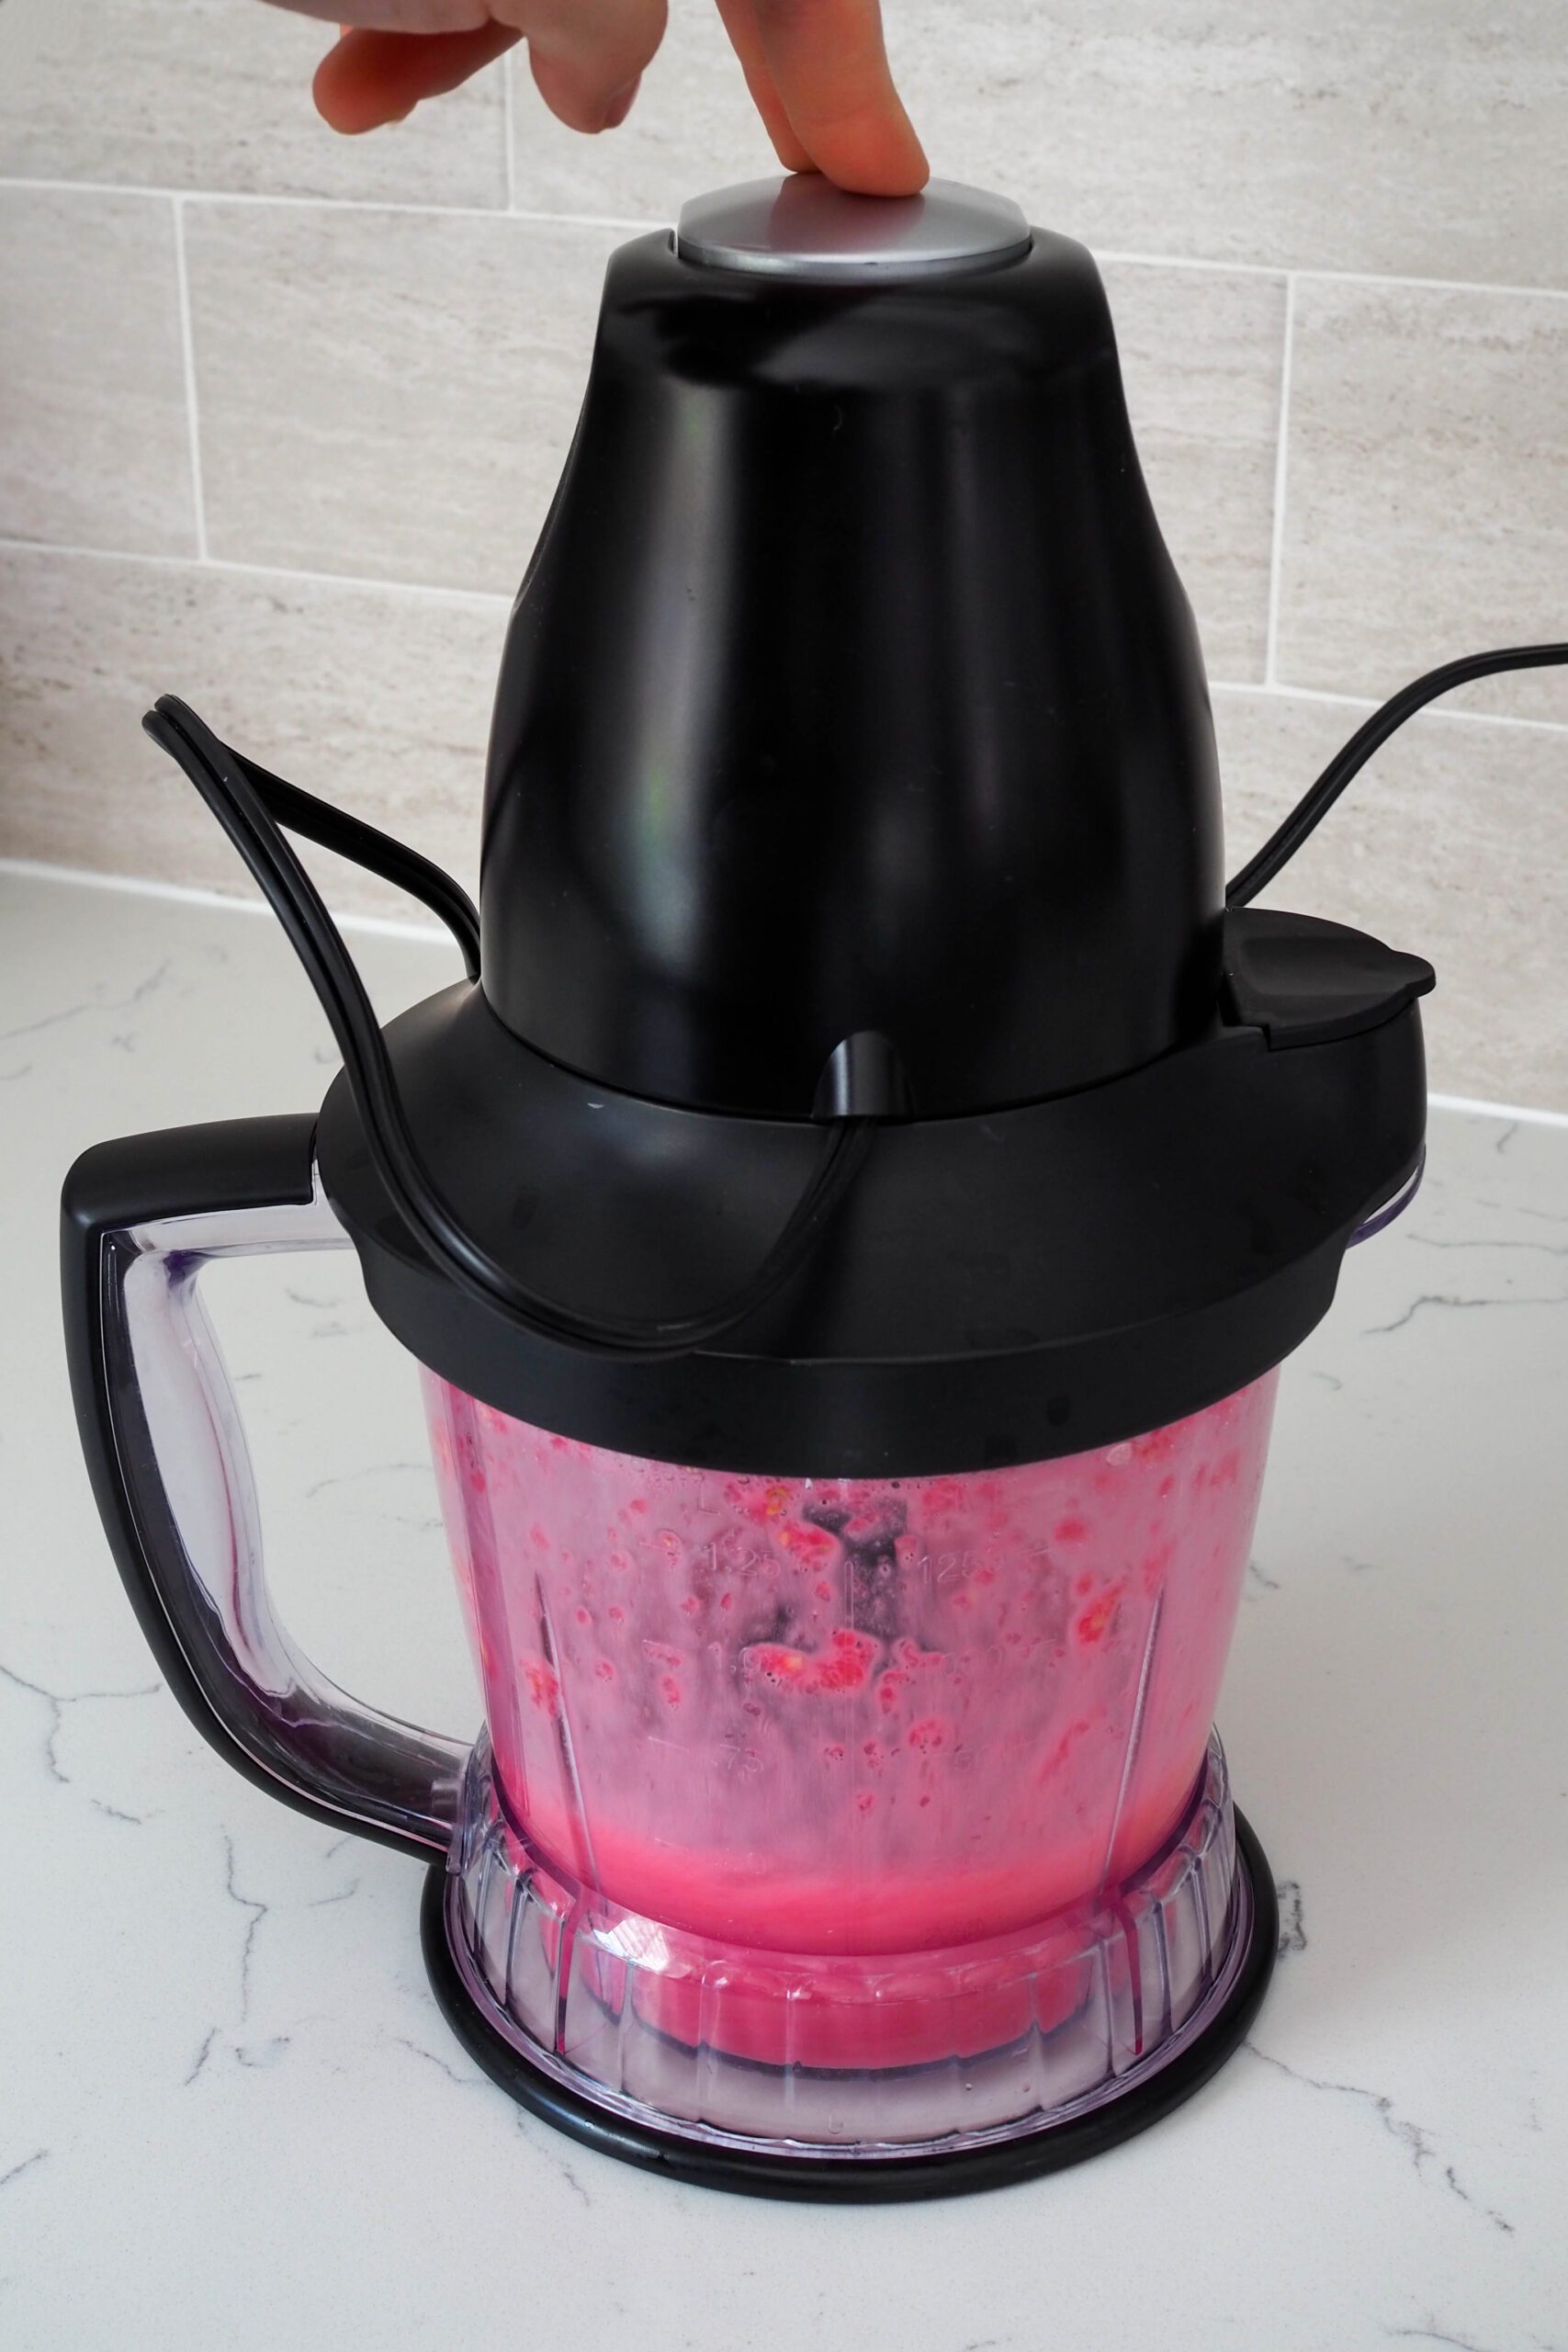 A hand presses down on a blender to blend dark red pomegranate juice.